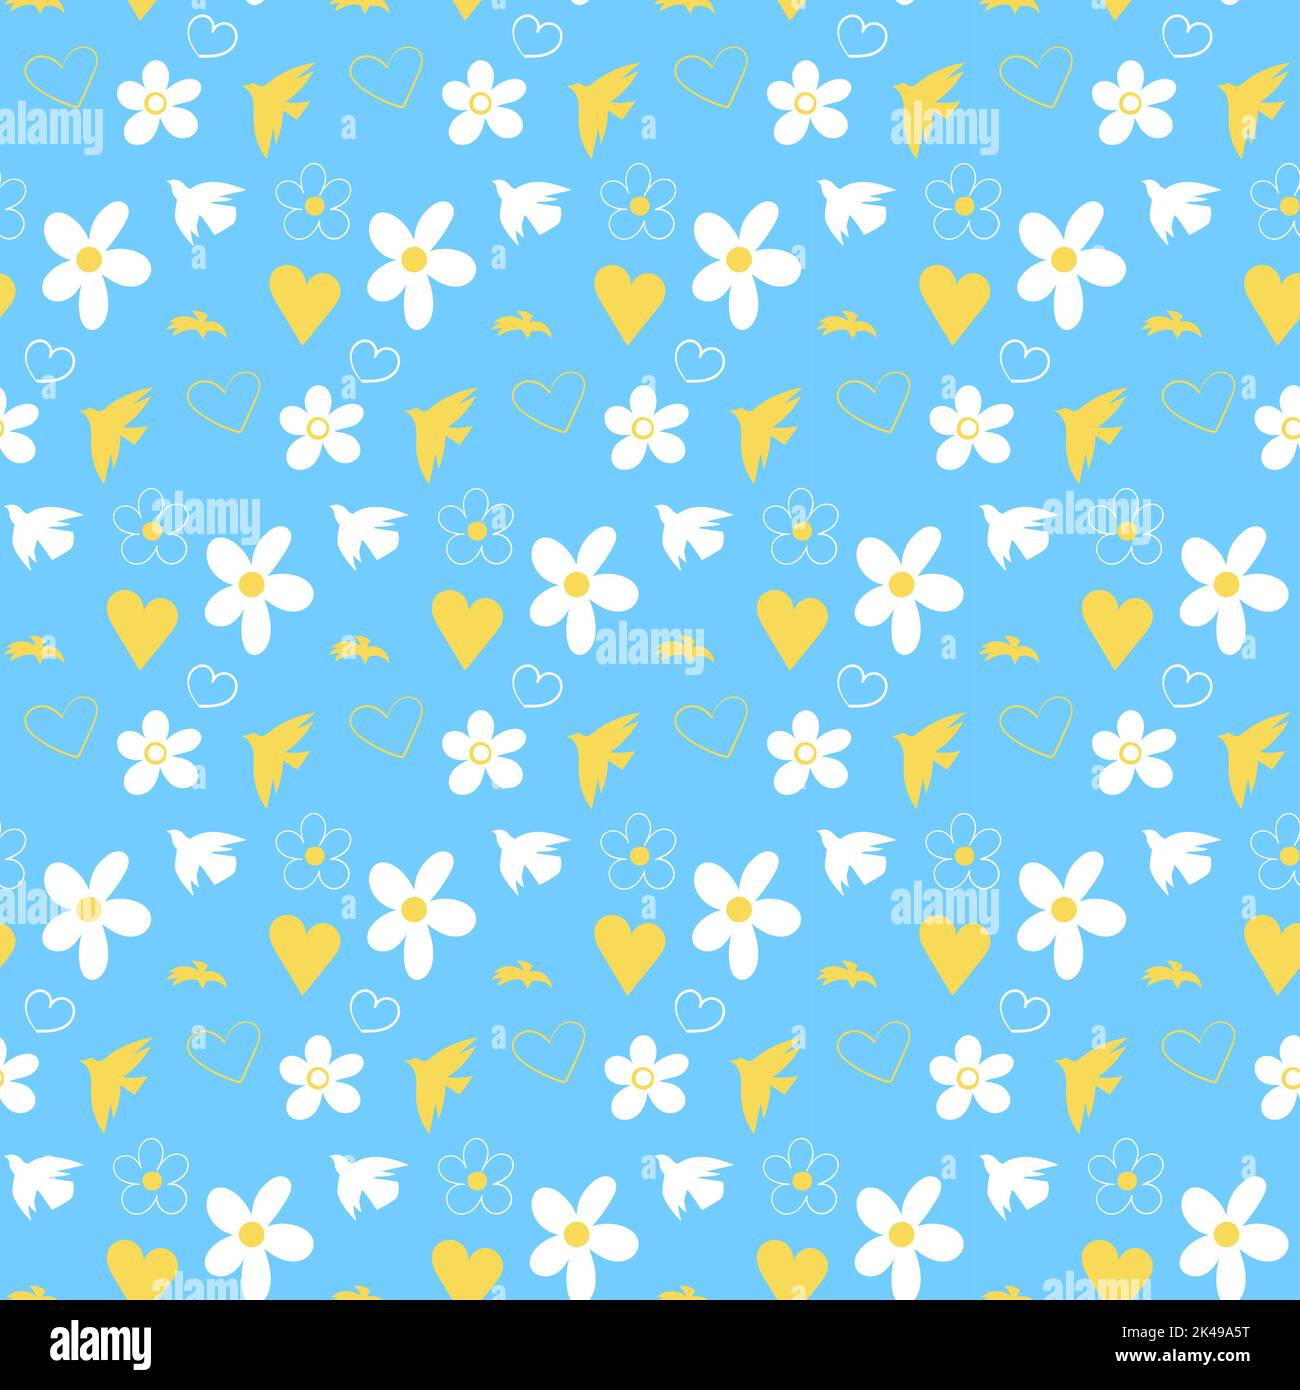 Seamless vector line art pattern made of white with yellow floral elements, birds - pigeons in flight, flowers, on blue. Ukrainian theme, concepts of Stock Vector